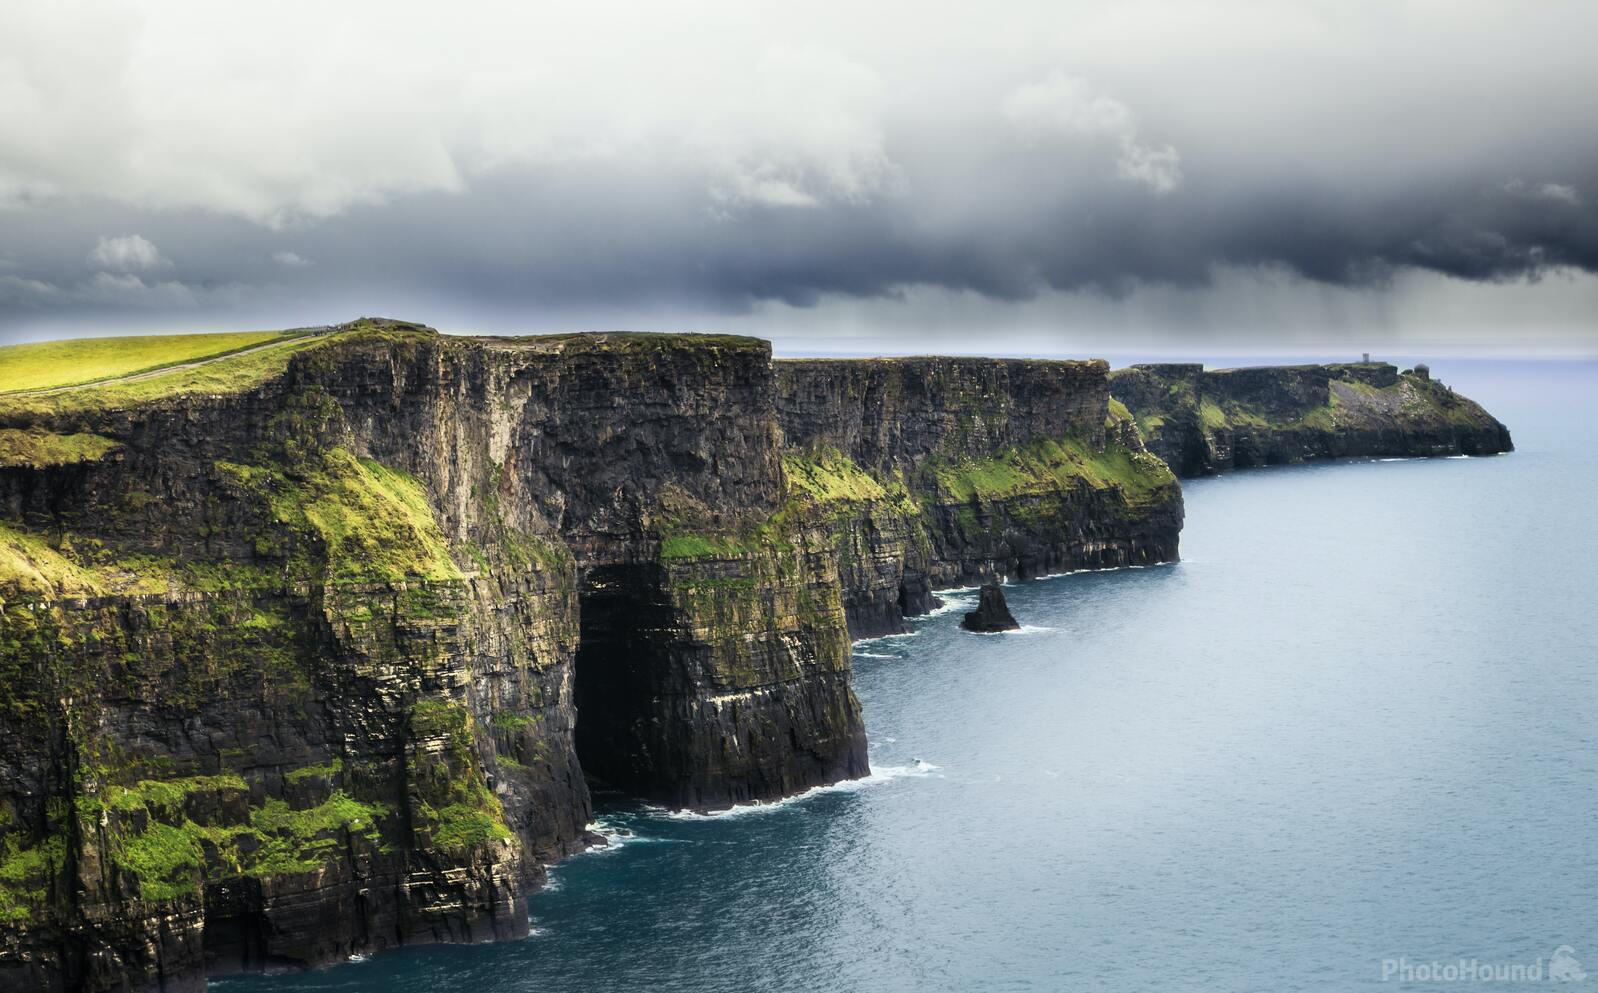 Image of Cliffs of Moher by Team PhotoHound